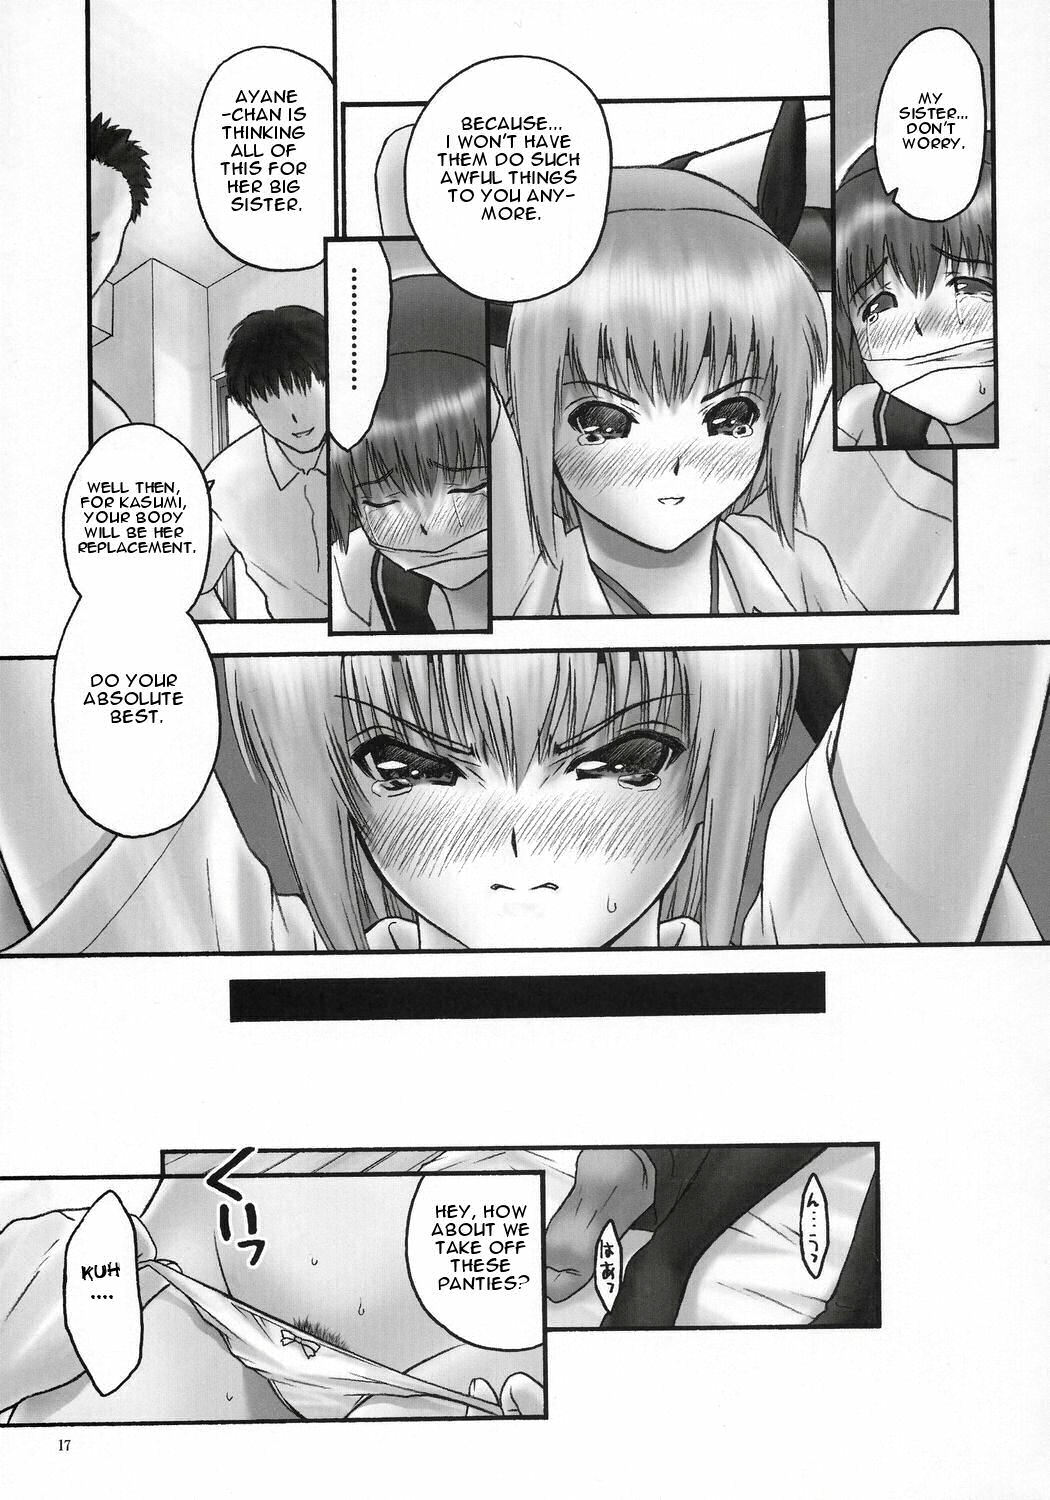 (C71) [Hellabunna (Iruma Kamiri)] Rei Chapter 03: Involve Slave to the Grind (Dead or Alive) [English] [One of a Kind Productions] page 16 full